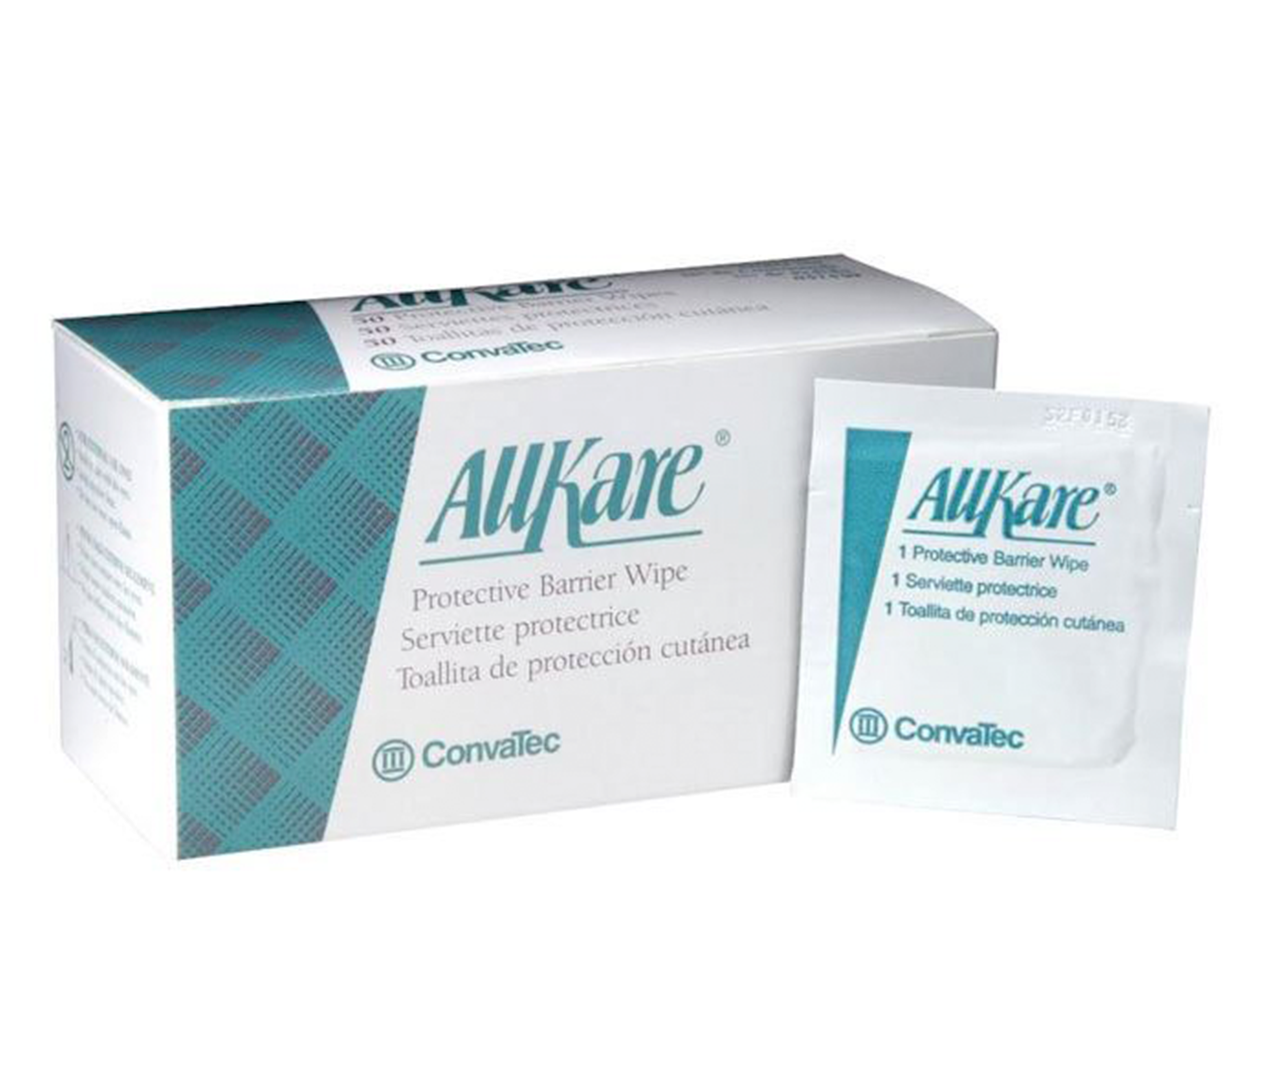 AllKare Adhesive Remover Wipes, 50 box — Mountainside Medical